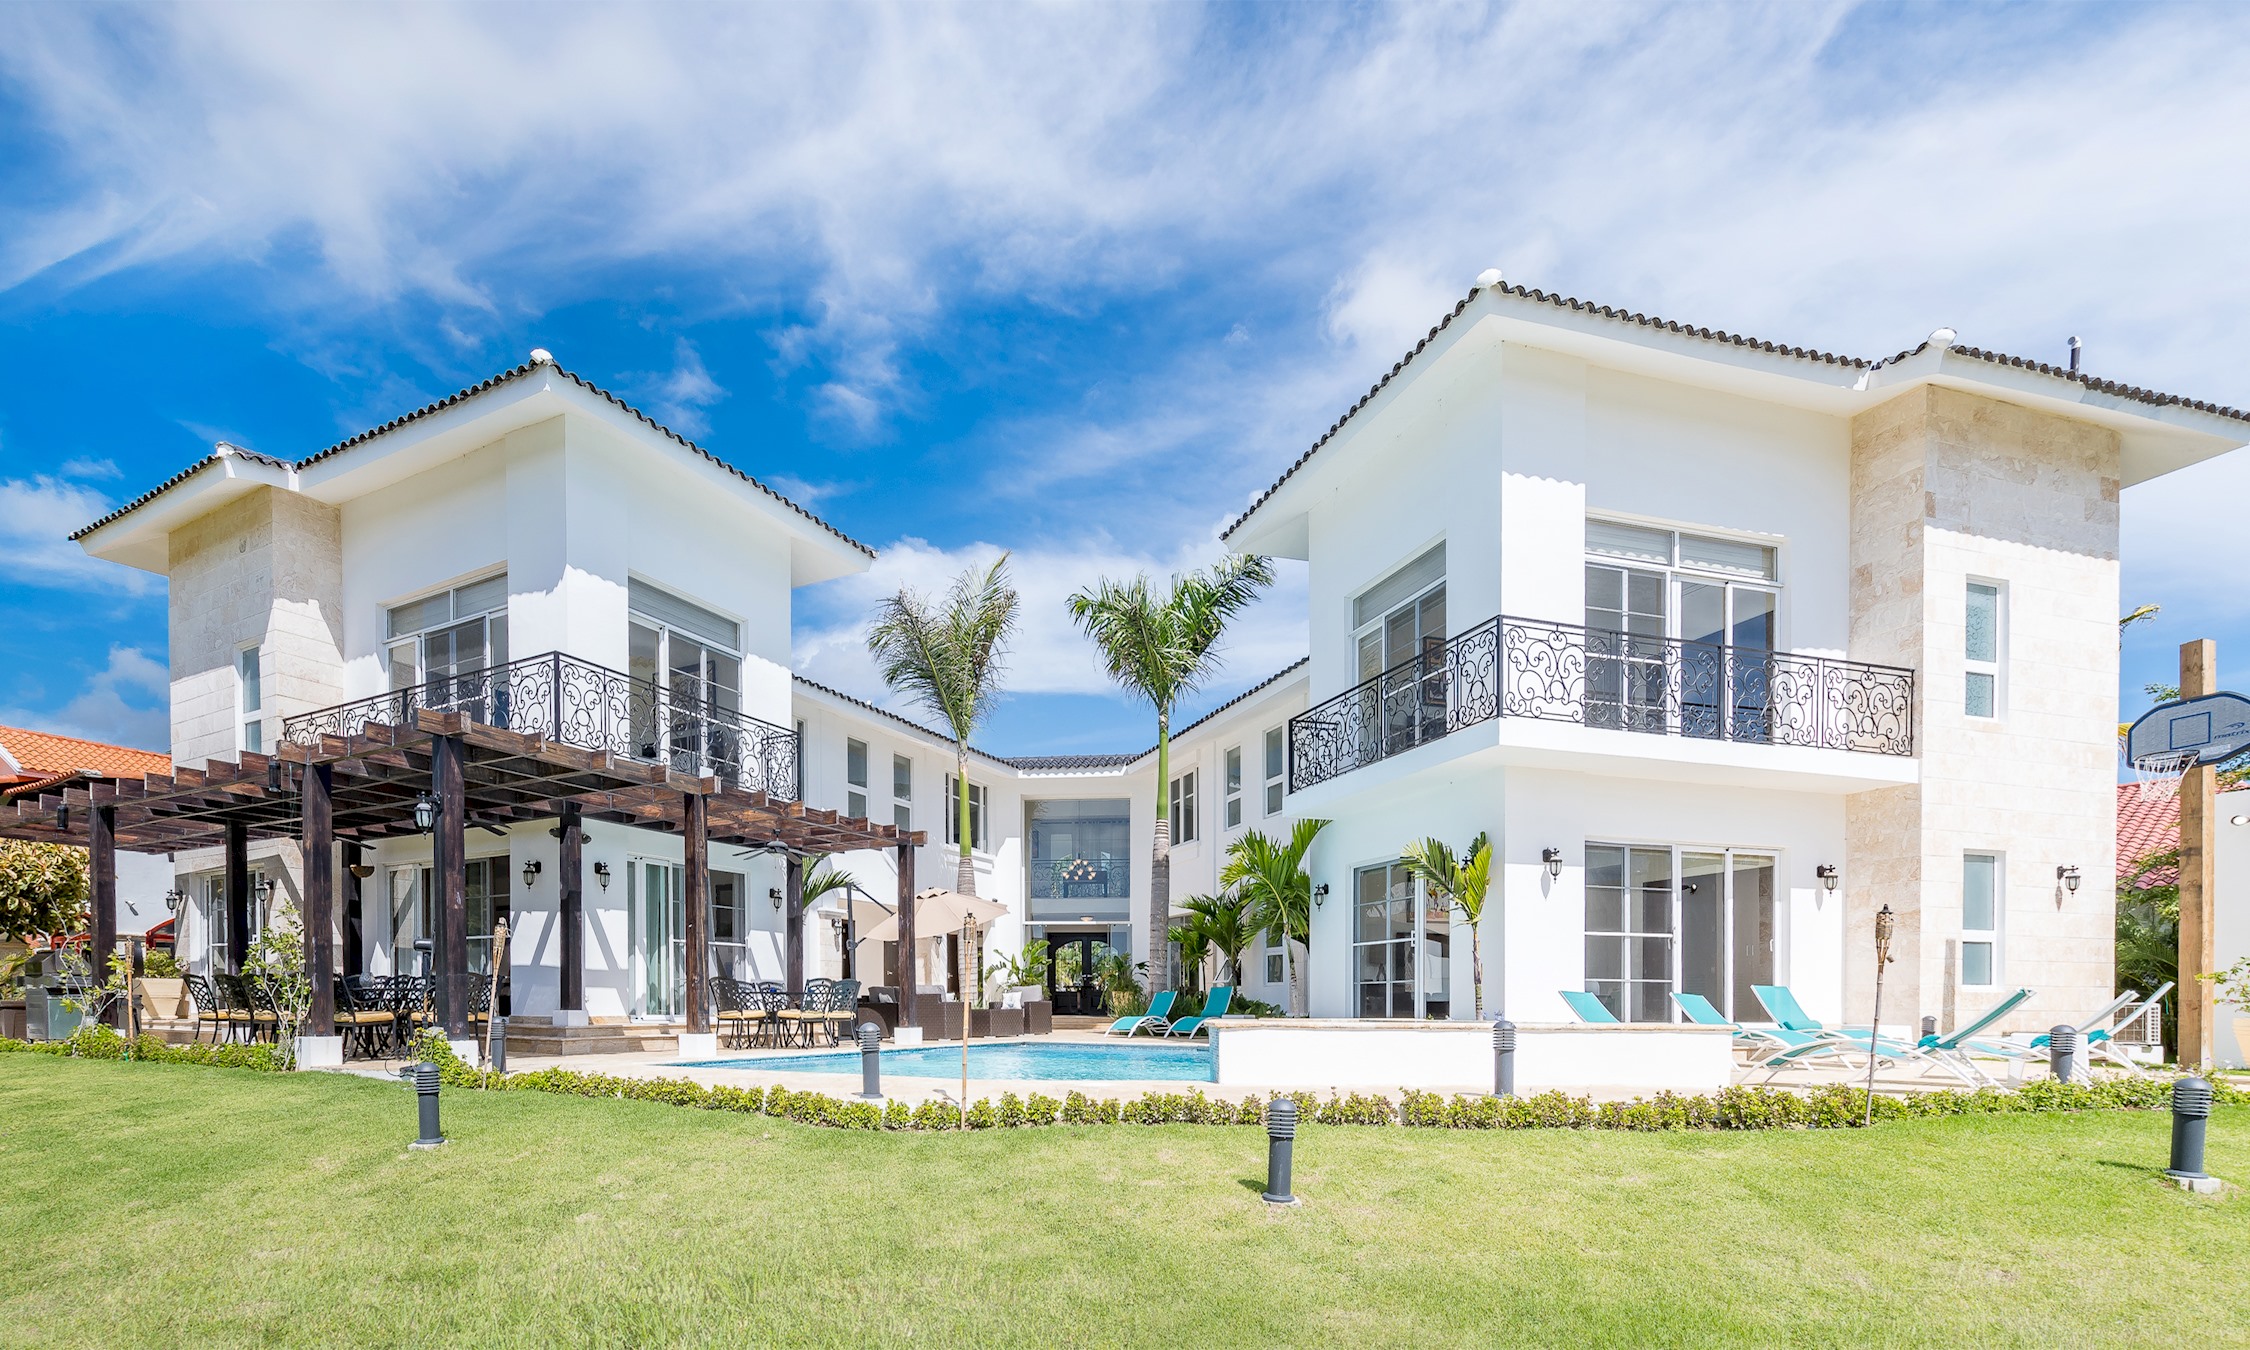 Huge villa for large groups in Bavaro - Up to 16 people with pool...